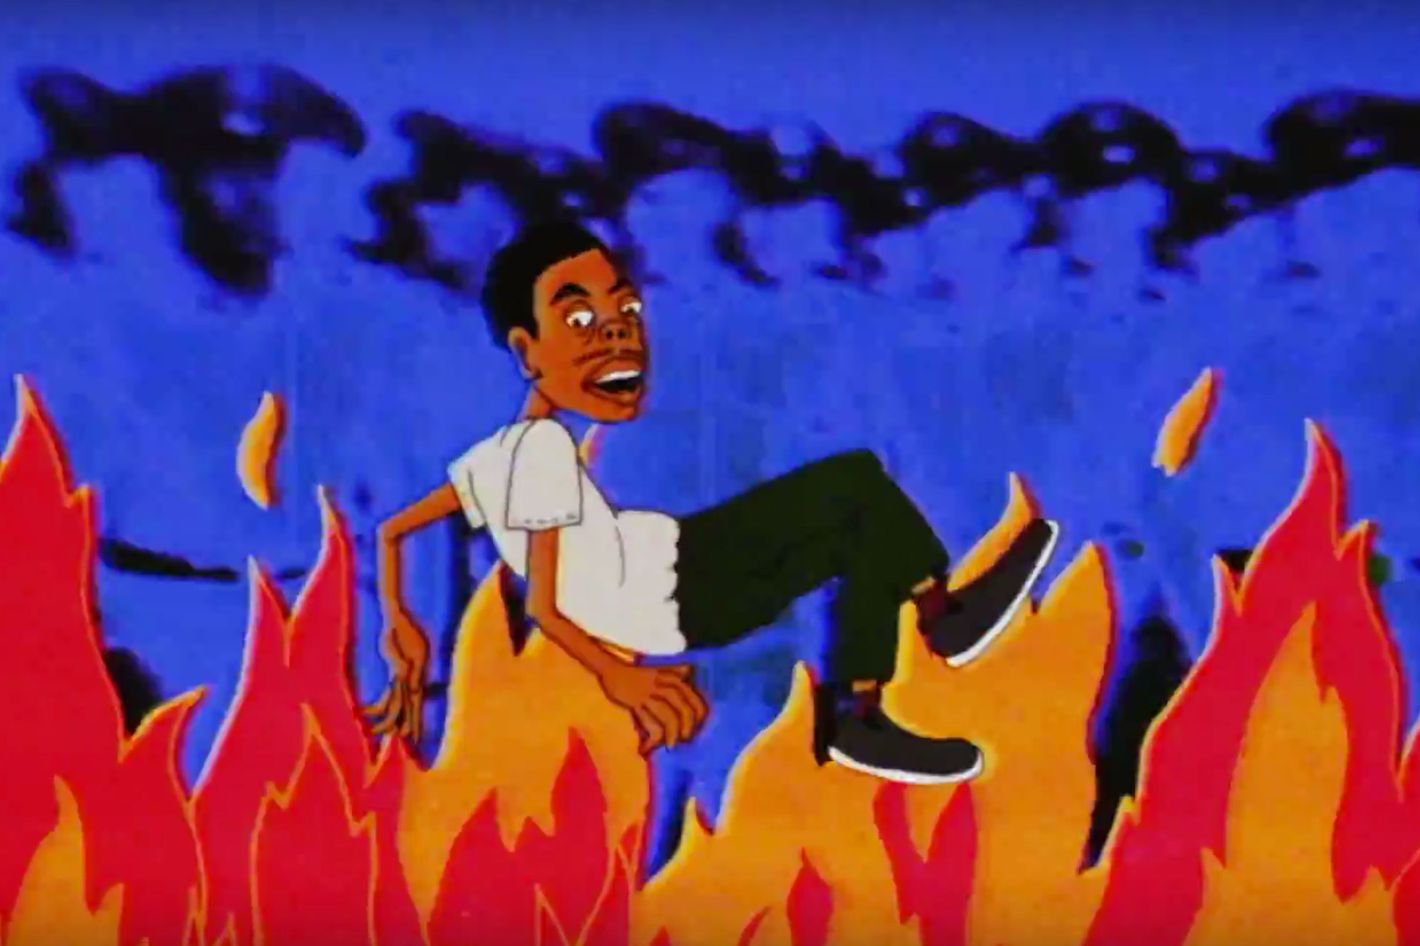 Earl Sweatshirt Made Himself Into A Cartoon For His Off Top Video